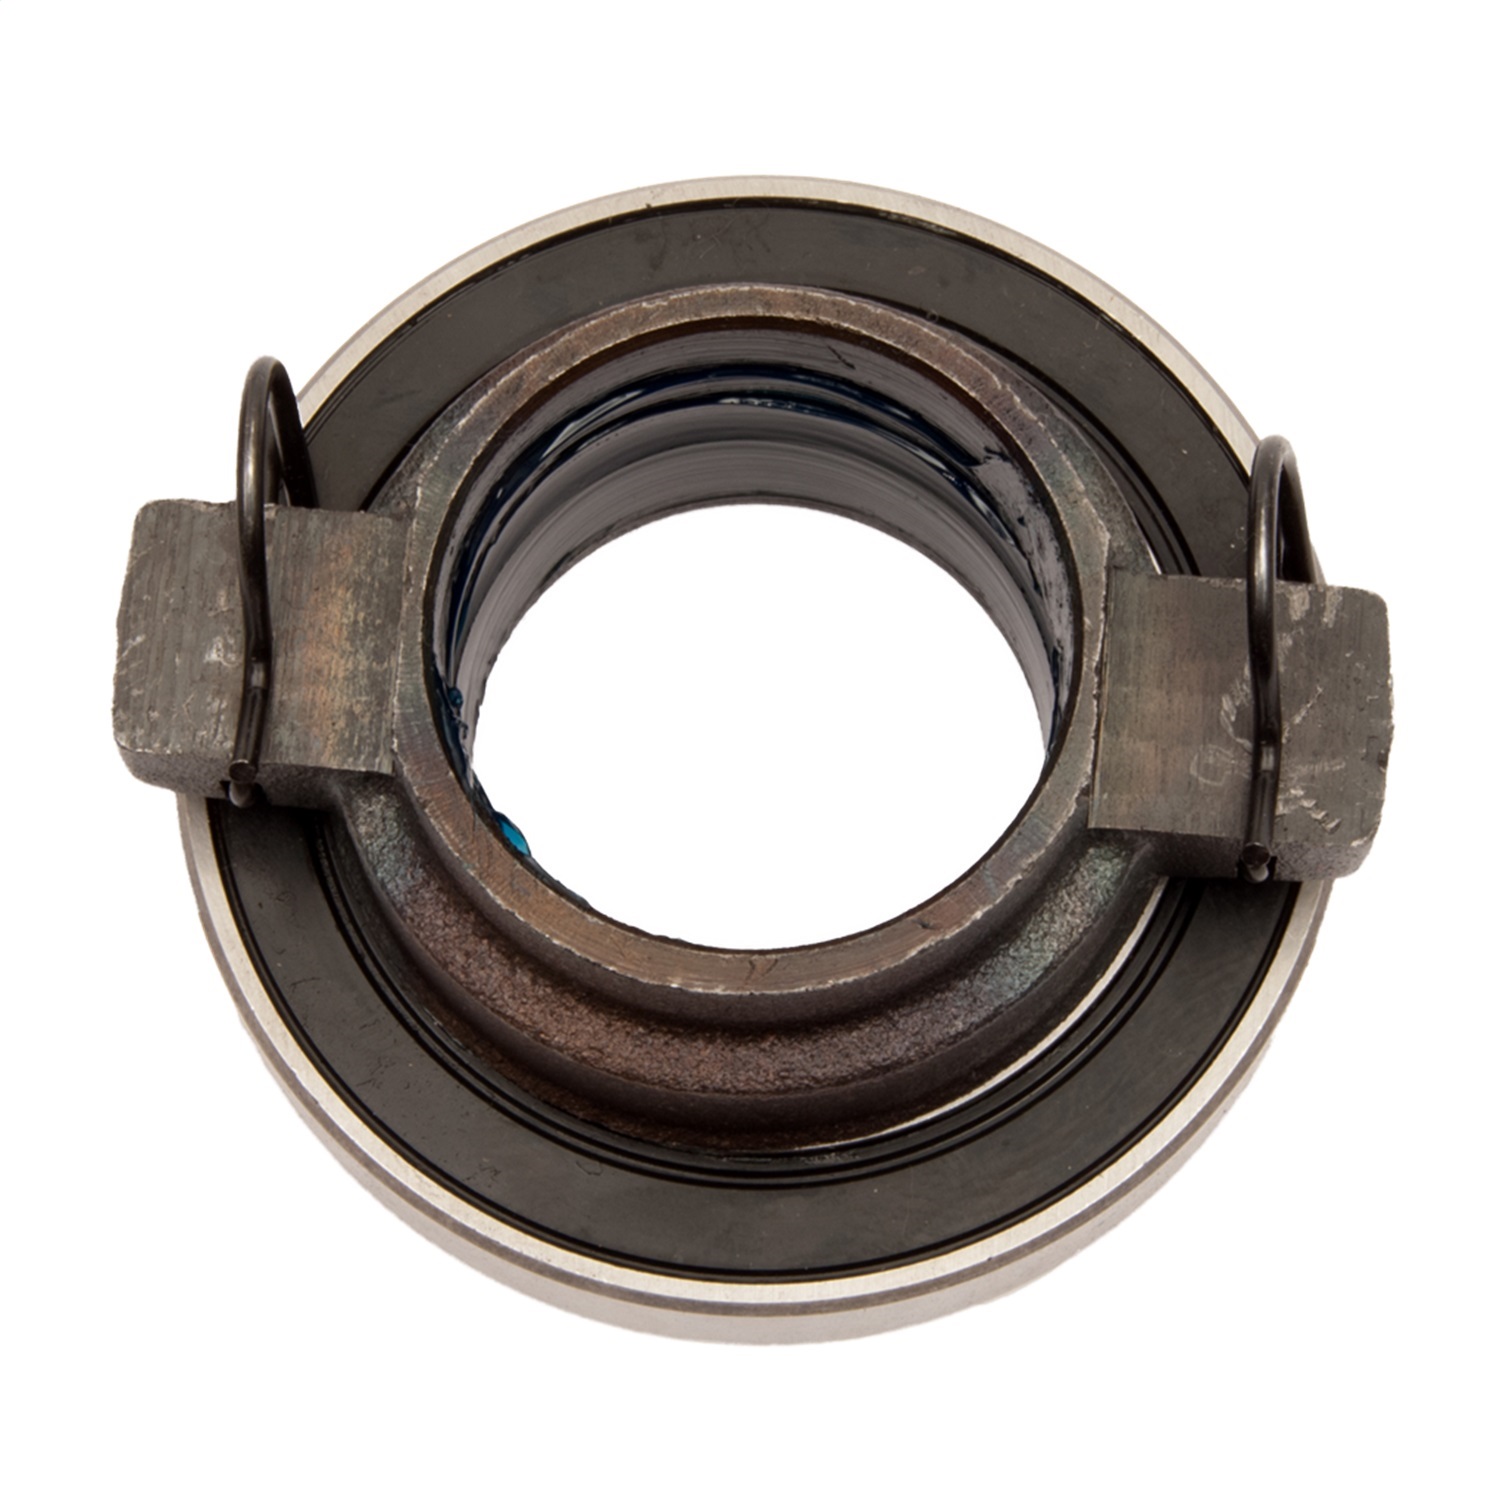 Centerforce Centerforce N1774 Throwout Bearing Fits 04-06 Ram 1500